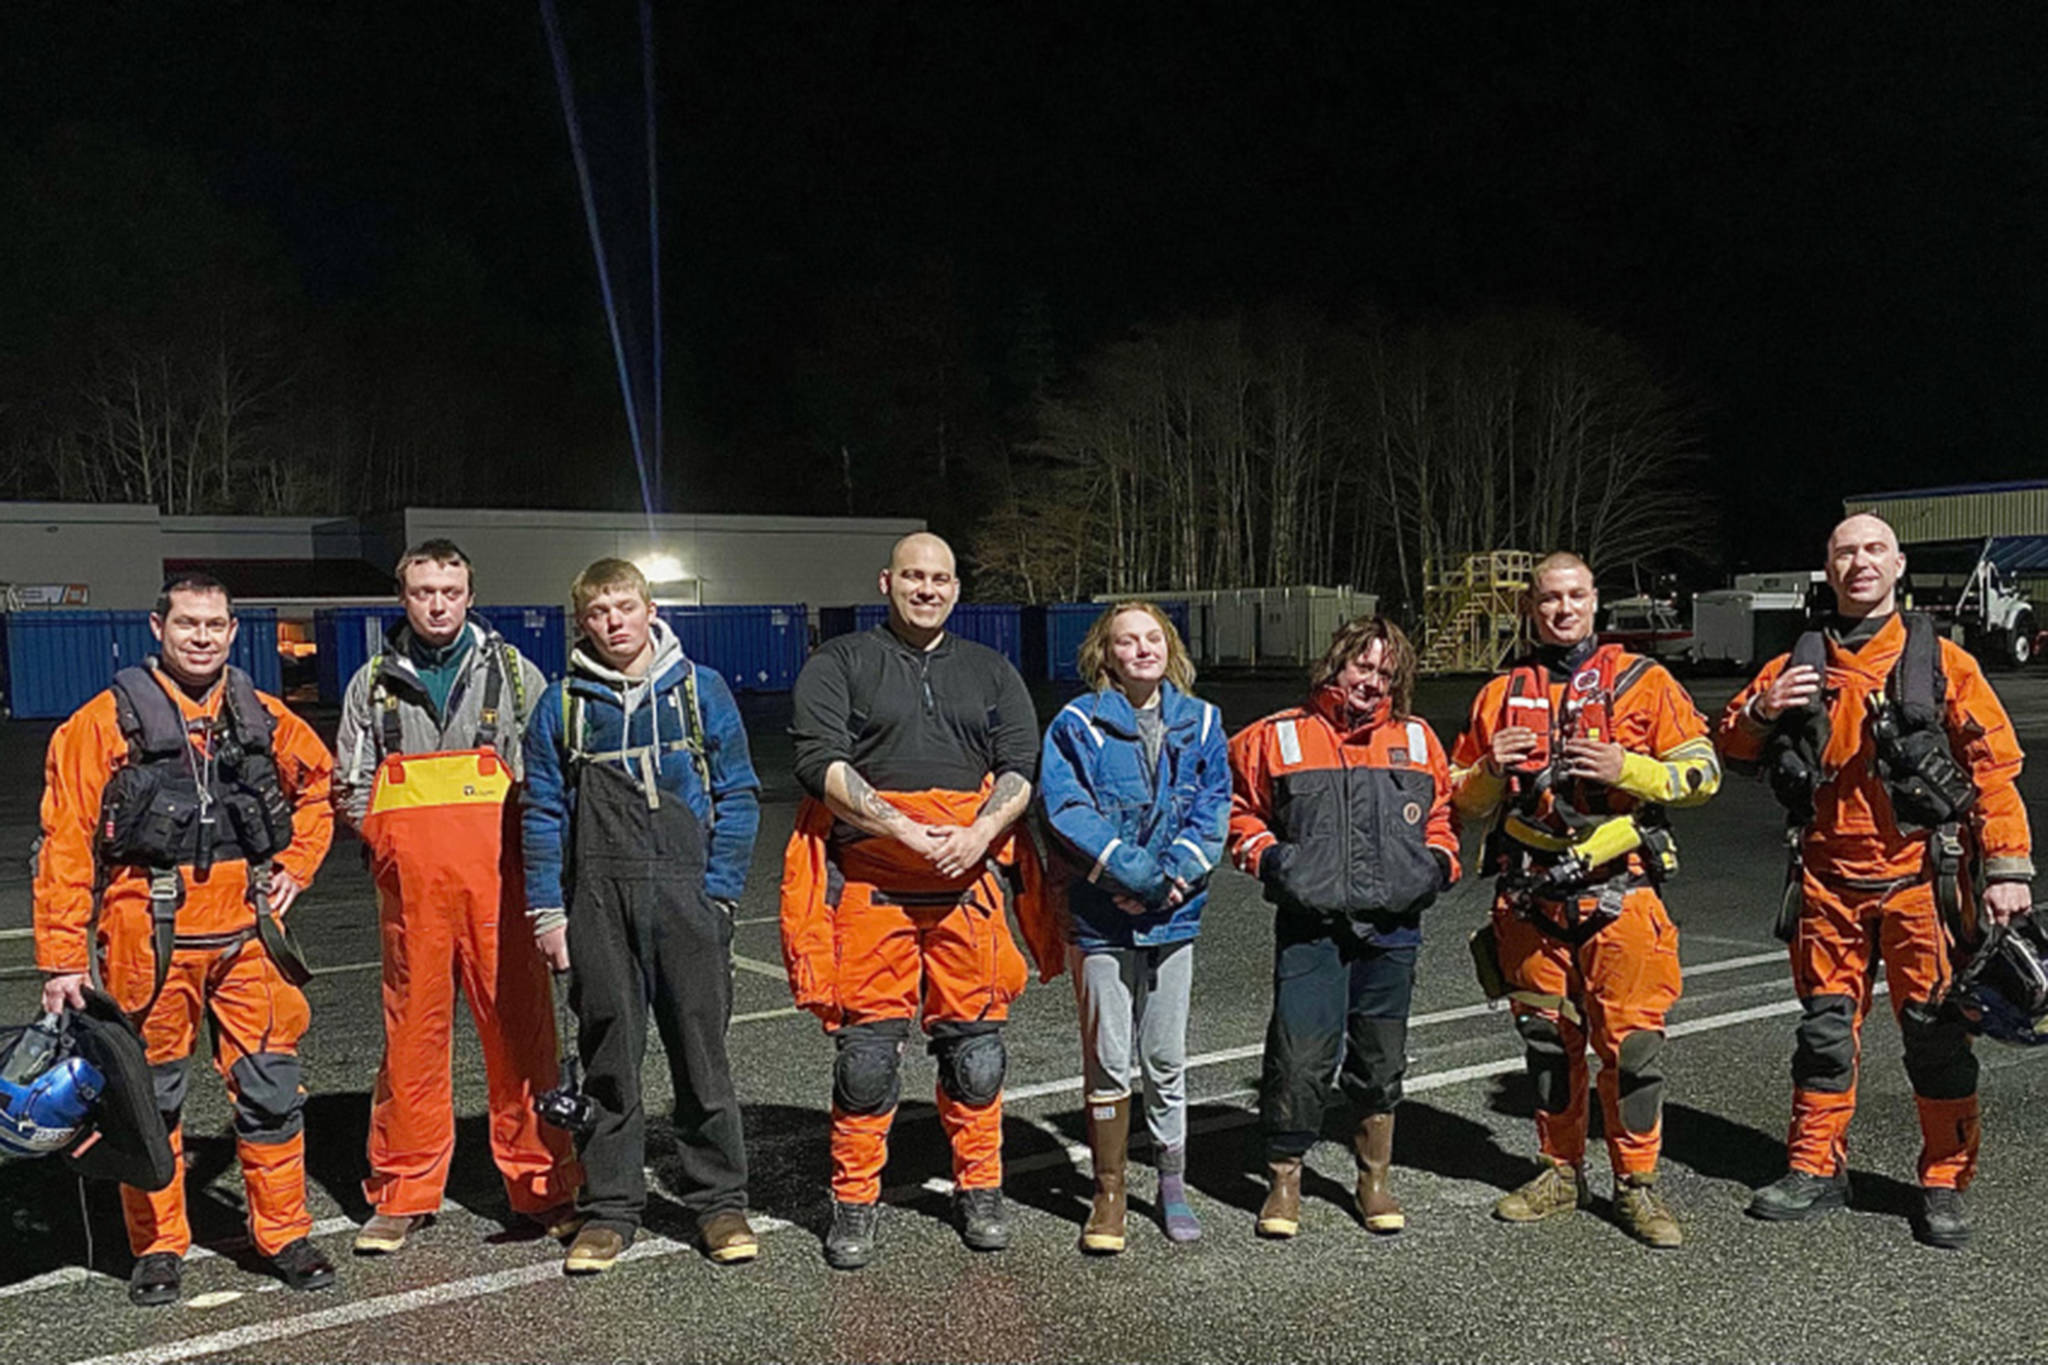 An MH-60 Jayhawk helicopter crew from Air Station Sitka pose with the family they rescued about an hour earlier from Yamani Islets, Dec. 25, 2020. The aircrew hoisted all four family members to safety after their boat capsized. (Courtesy Photo / Coast Guard Air Station Sitka)